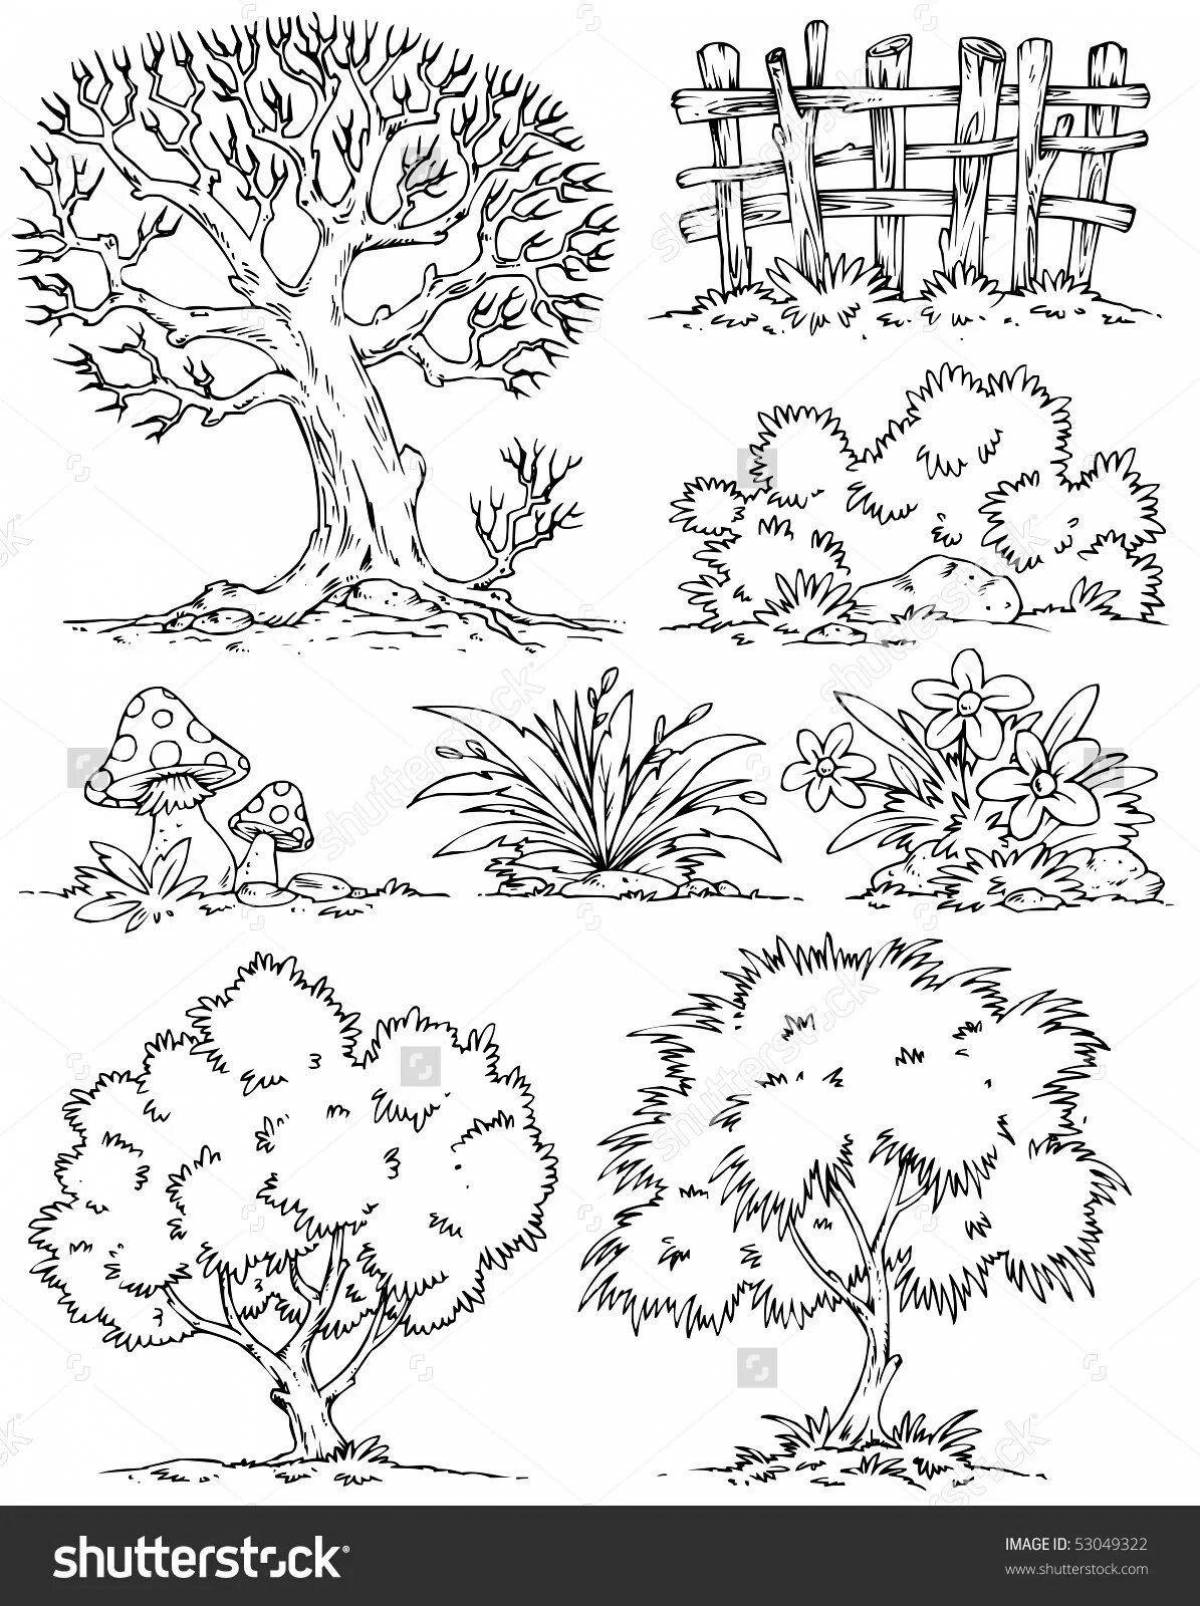 Glowing bush coloring book for kids